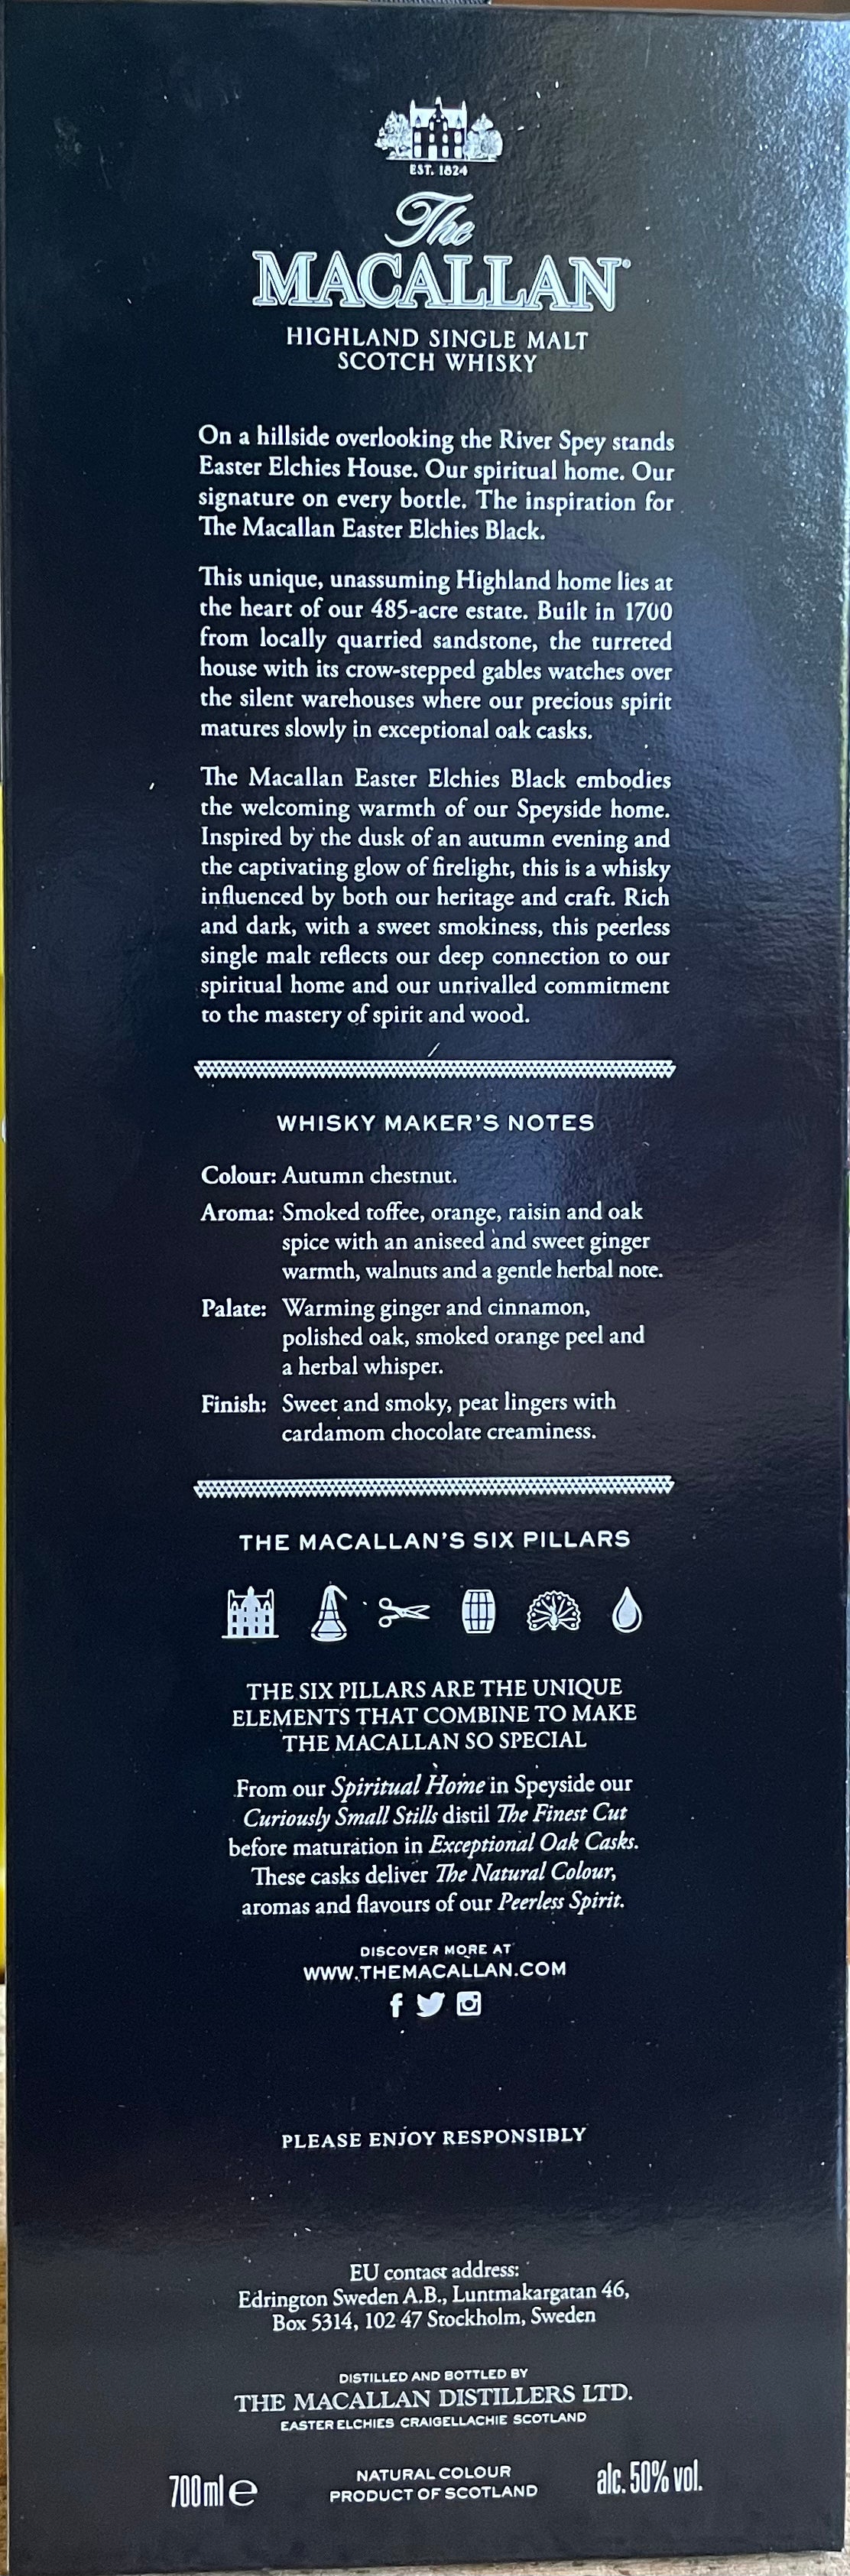 The Macallan Easter Elchies Black Whisky